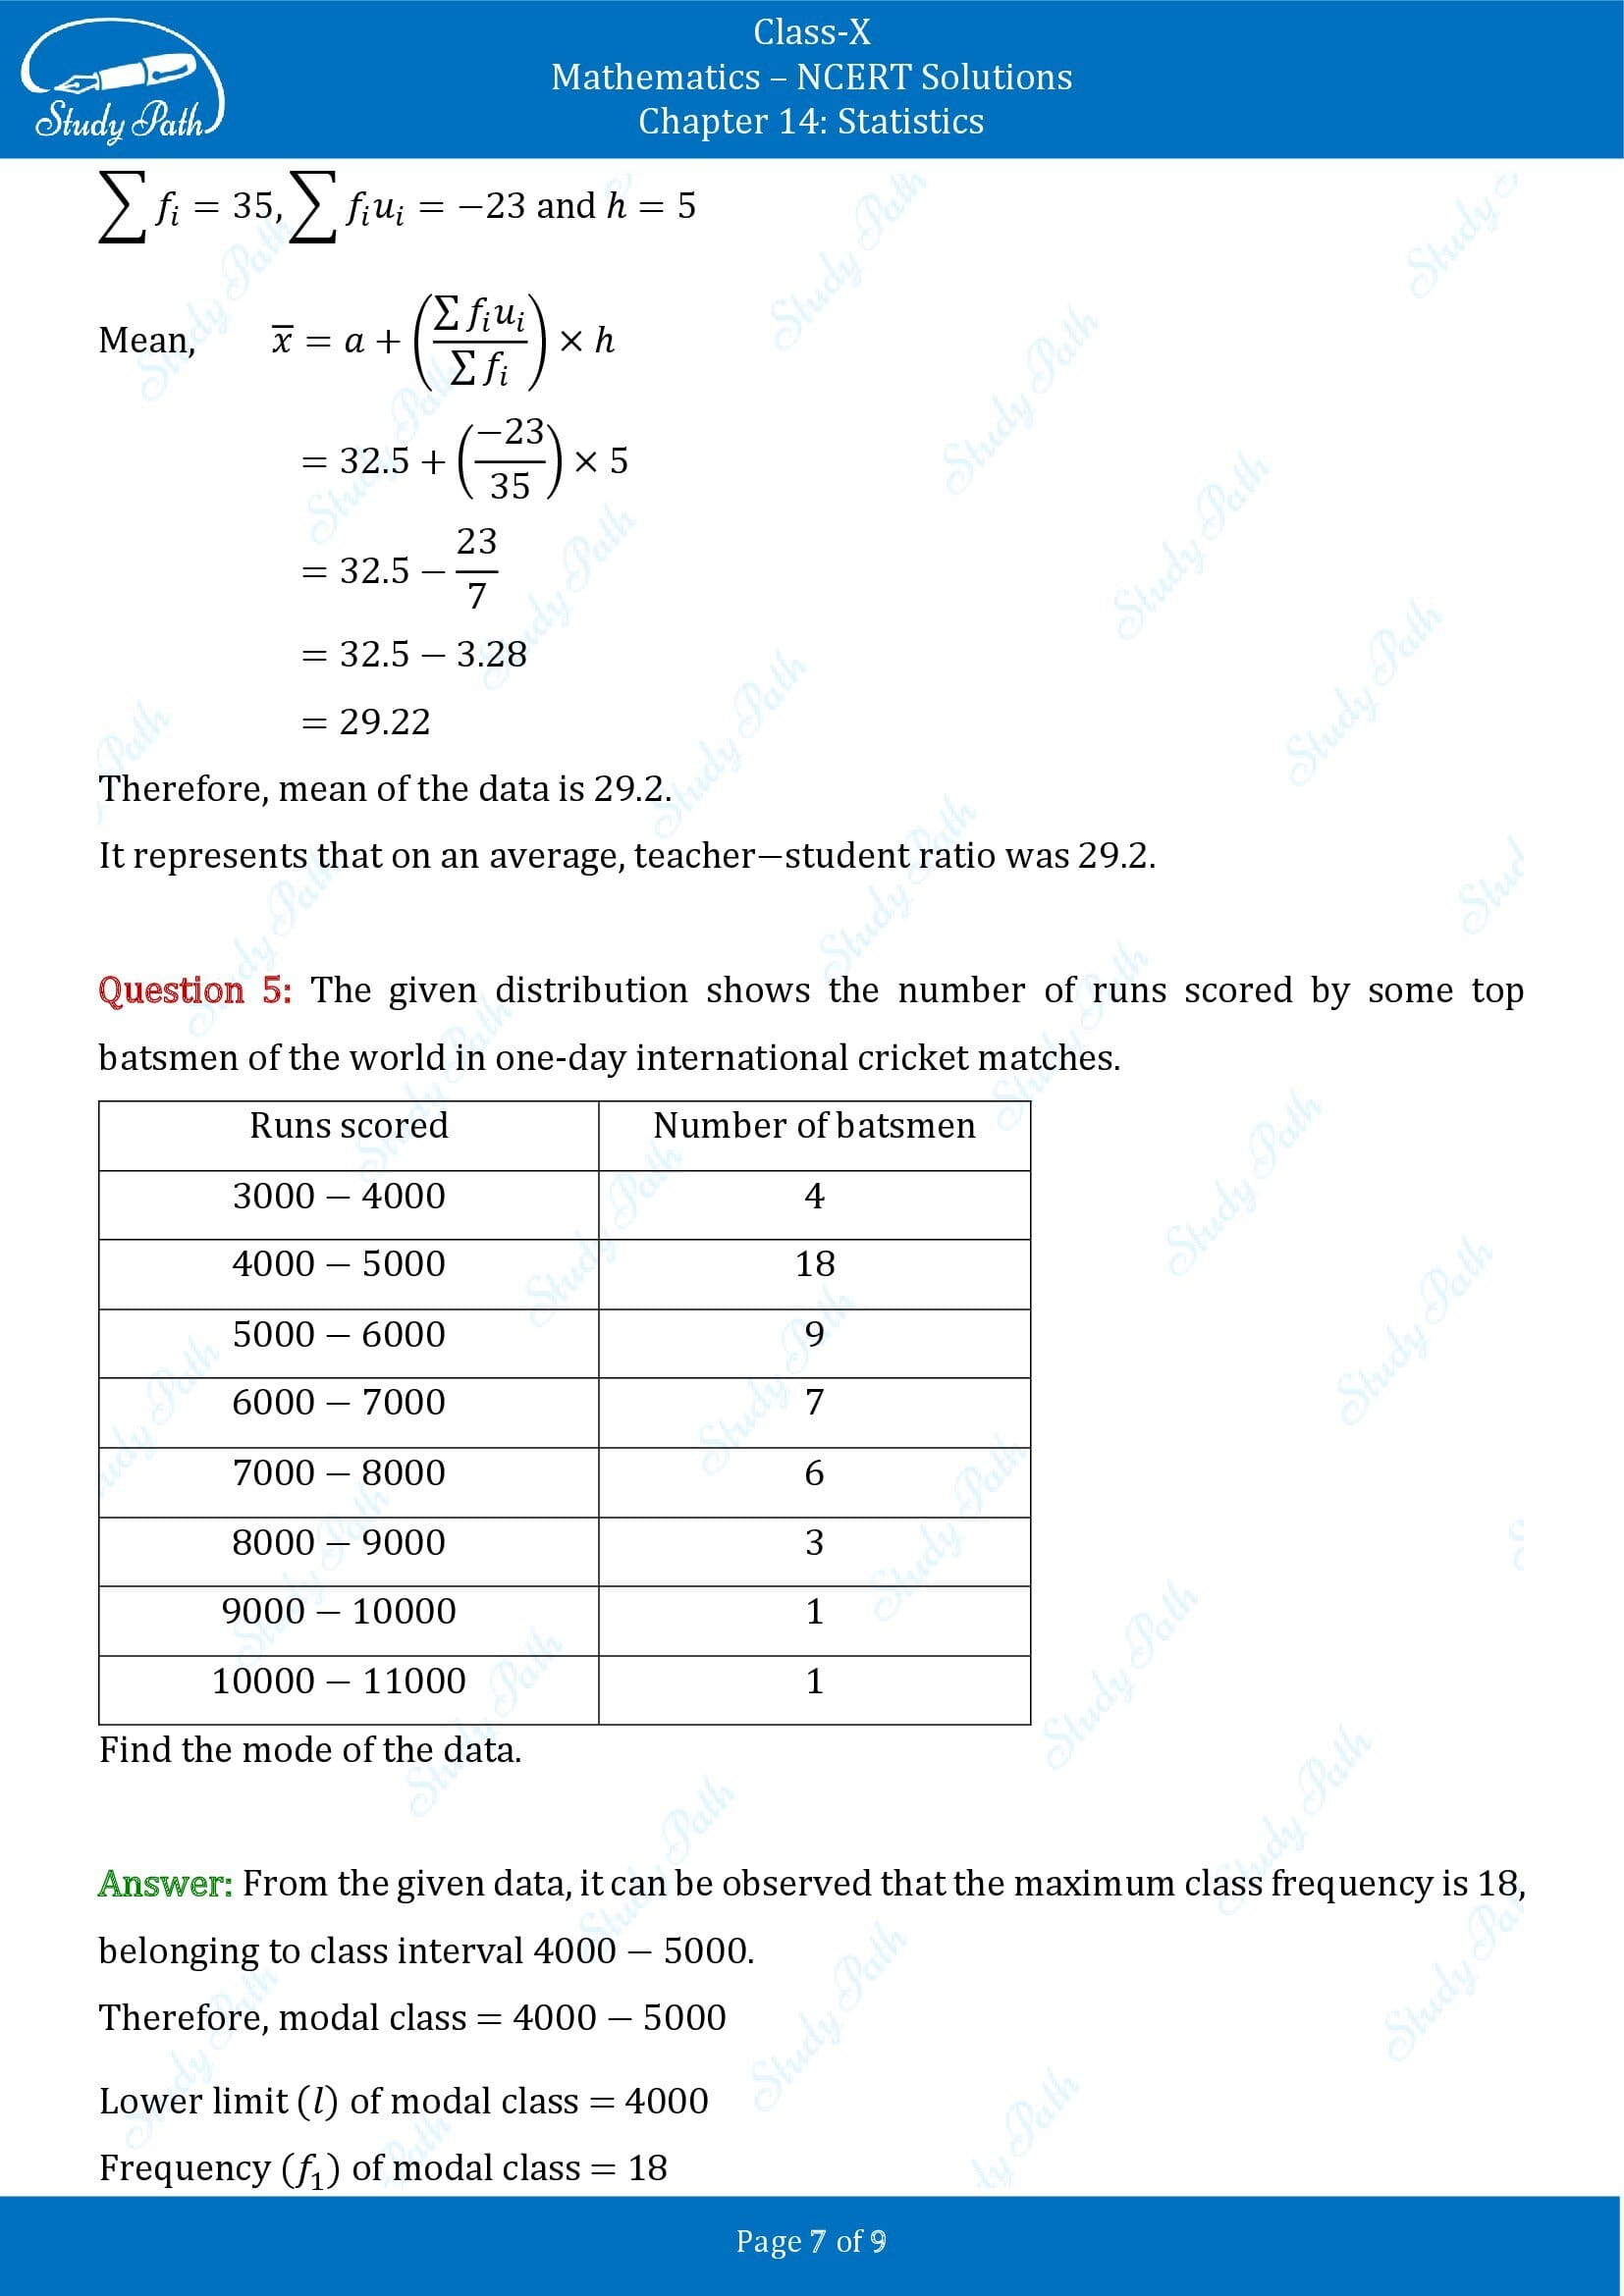 NCERT Solutions for Class 10 Maths Chapter 14 Statistics Exercise 14.2 00007